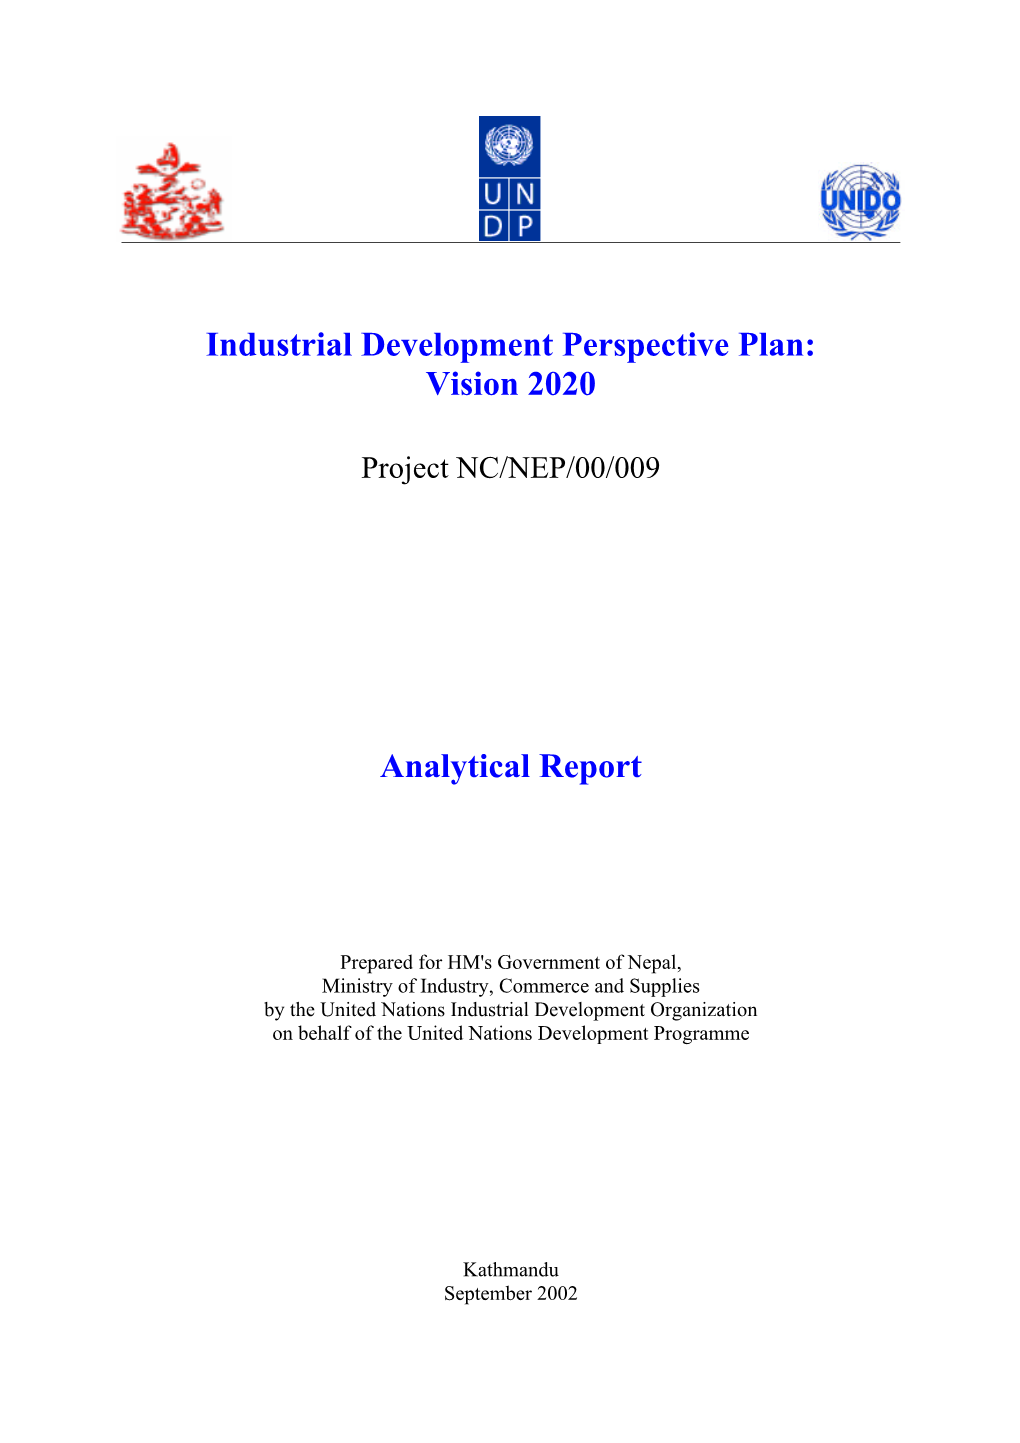 Industrial Development Perspective Plan: Vision 2020 Analytical Report